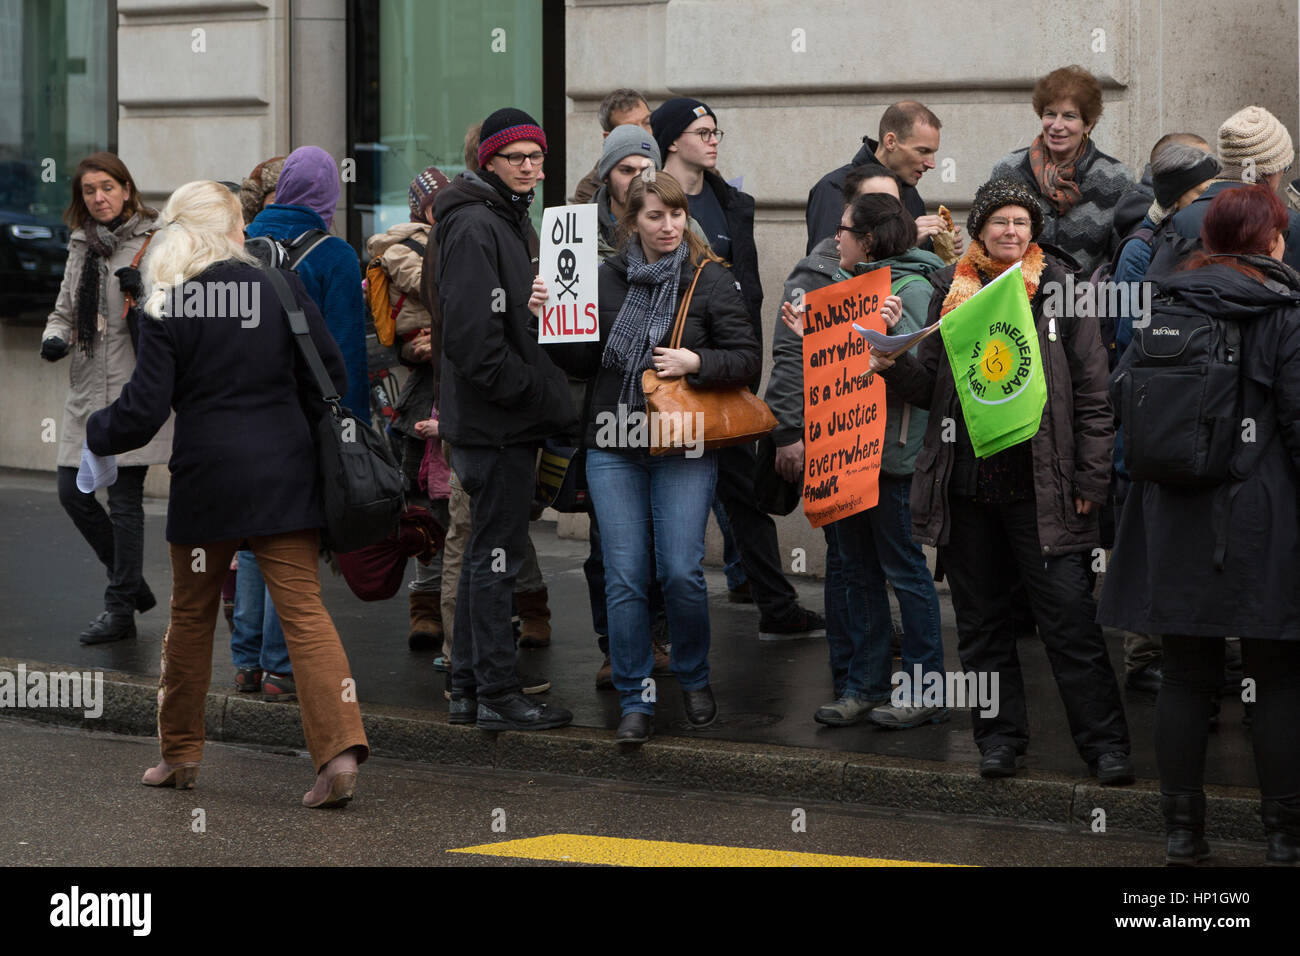 Basel, Switzerland. 17th Feb, 2017. A peaceful protest outside the offices of two major Swiss banks, UBS and Credit Suisse, in an effort to stop them funding the Dakota Access Pipeling (DAPL). Credit: Stephen Allen/Alamy Live News Stock Photo